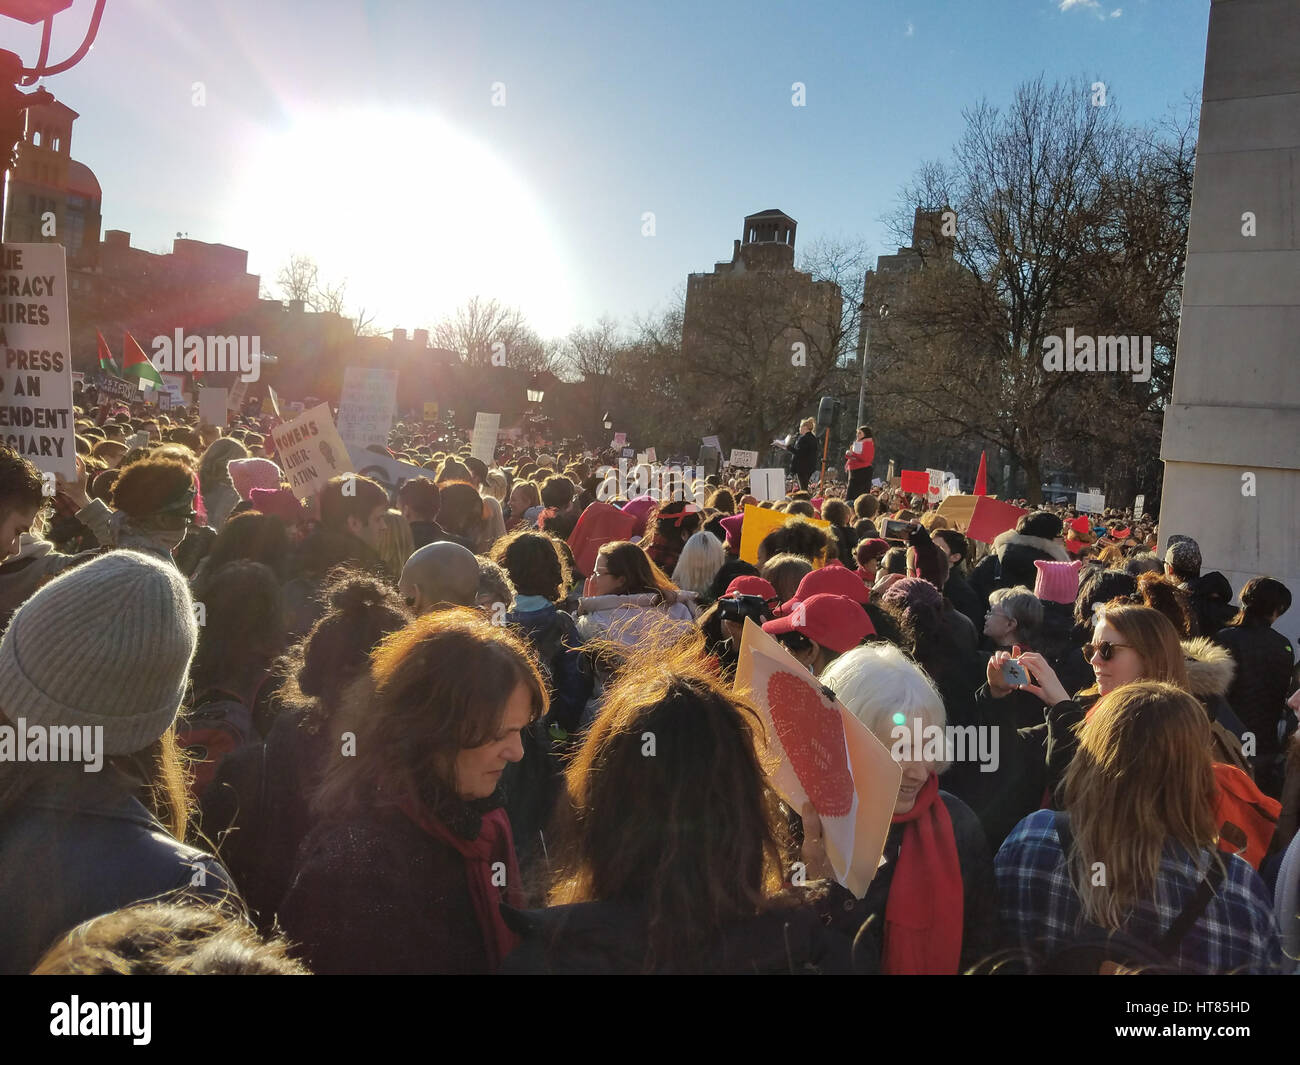 New York City, USA. 8th March, 2017. Protesters gathered in Washington Square Park in lower Manhattan in support of labor campaigns, migrants' rights, sanctuary campus campaigns, and other movements. Credit: Ward Pettibone/Alamy Live News. Stock Photo